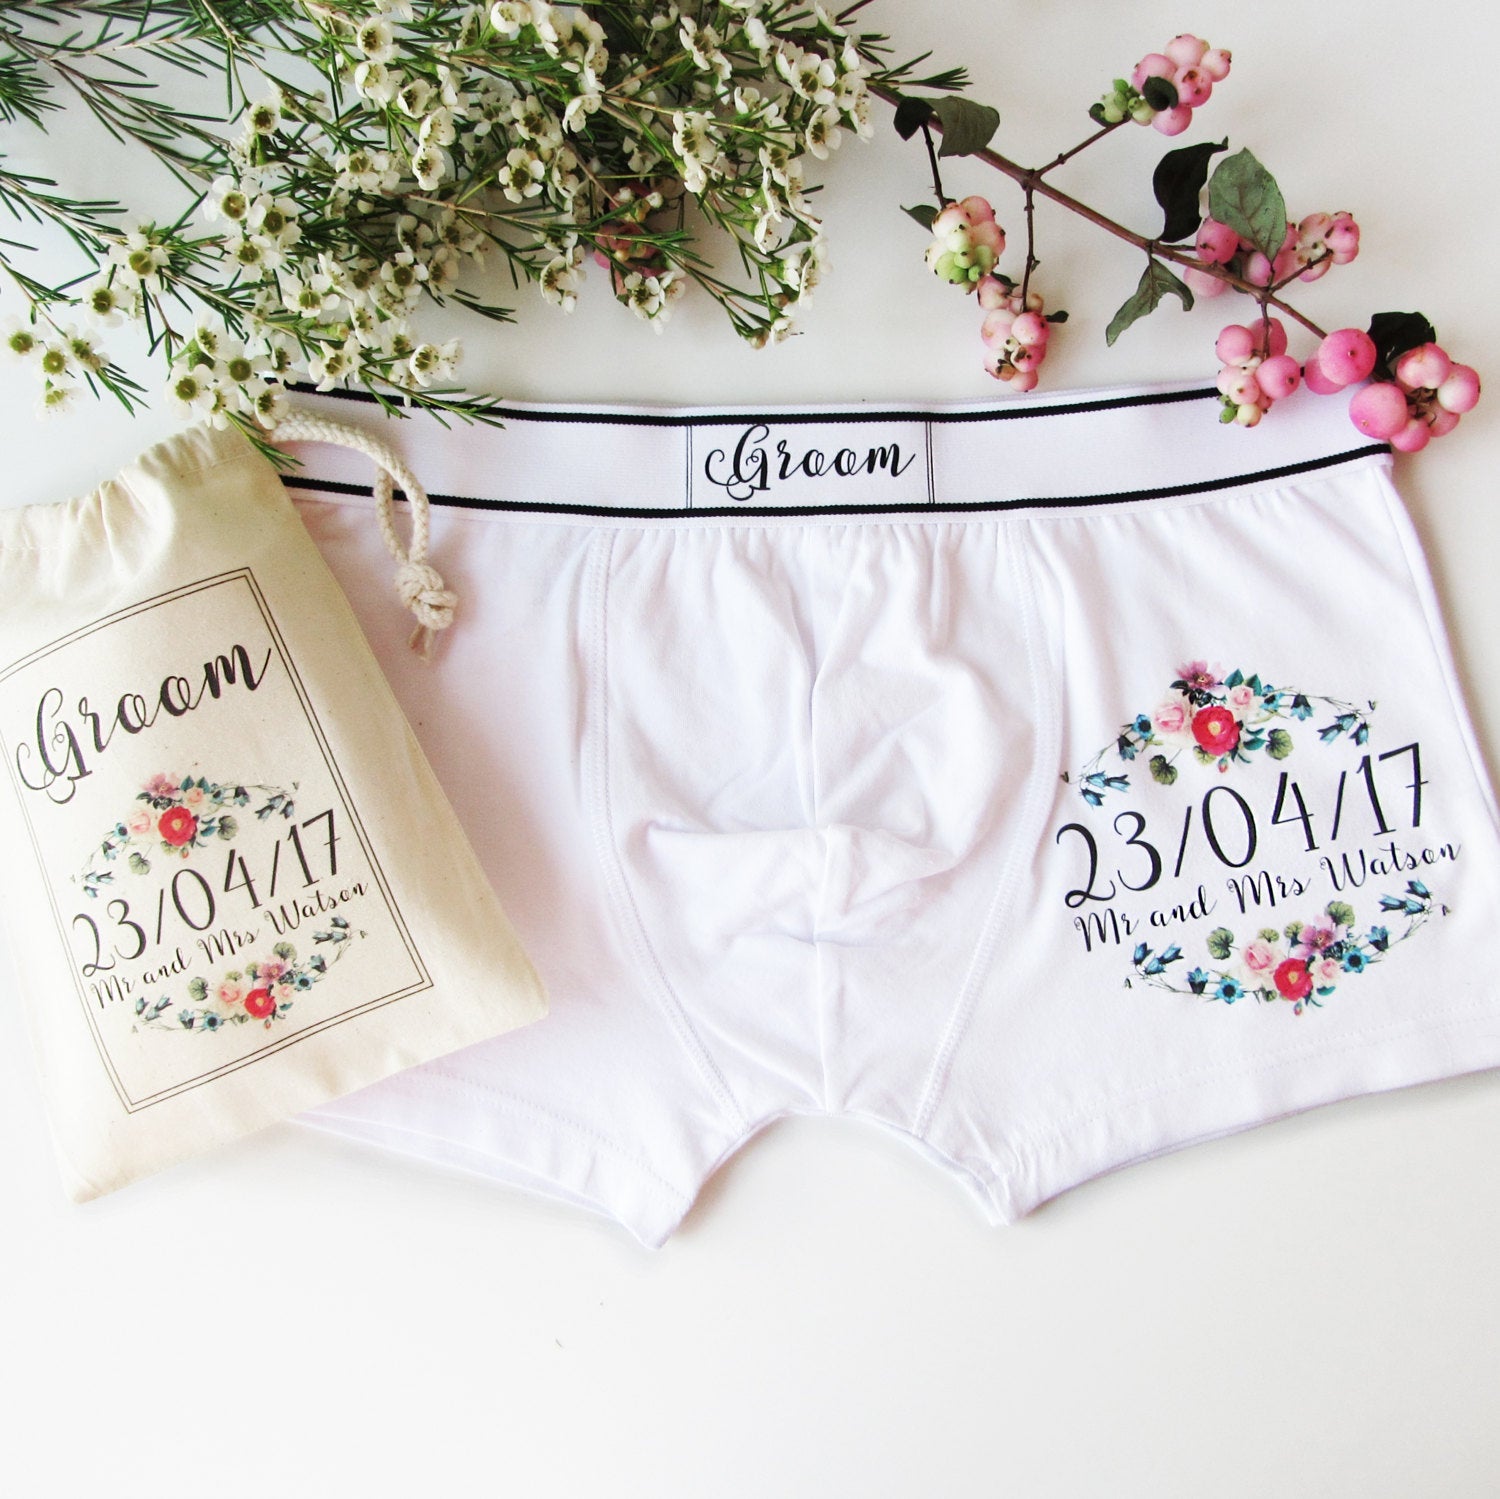 PERSONALISED BOXER BRIEFS GIFT ANNIVERSARY WEDDING PARTY ORIGINAL